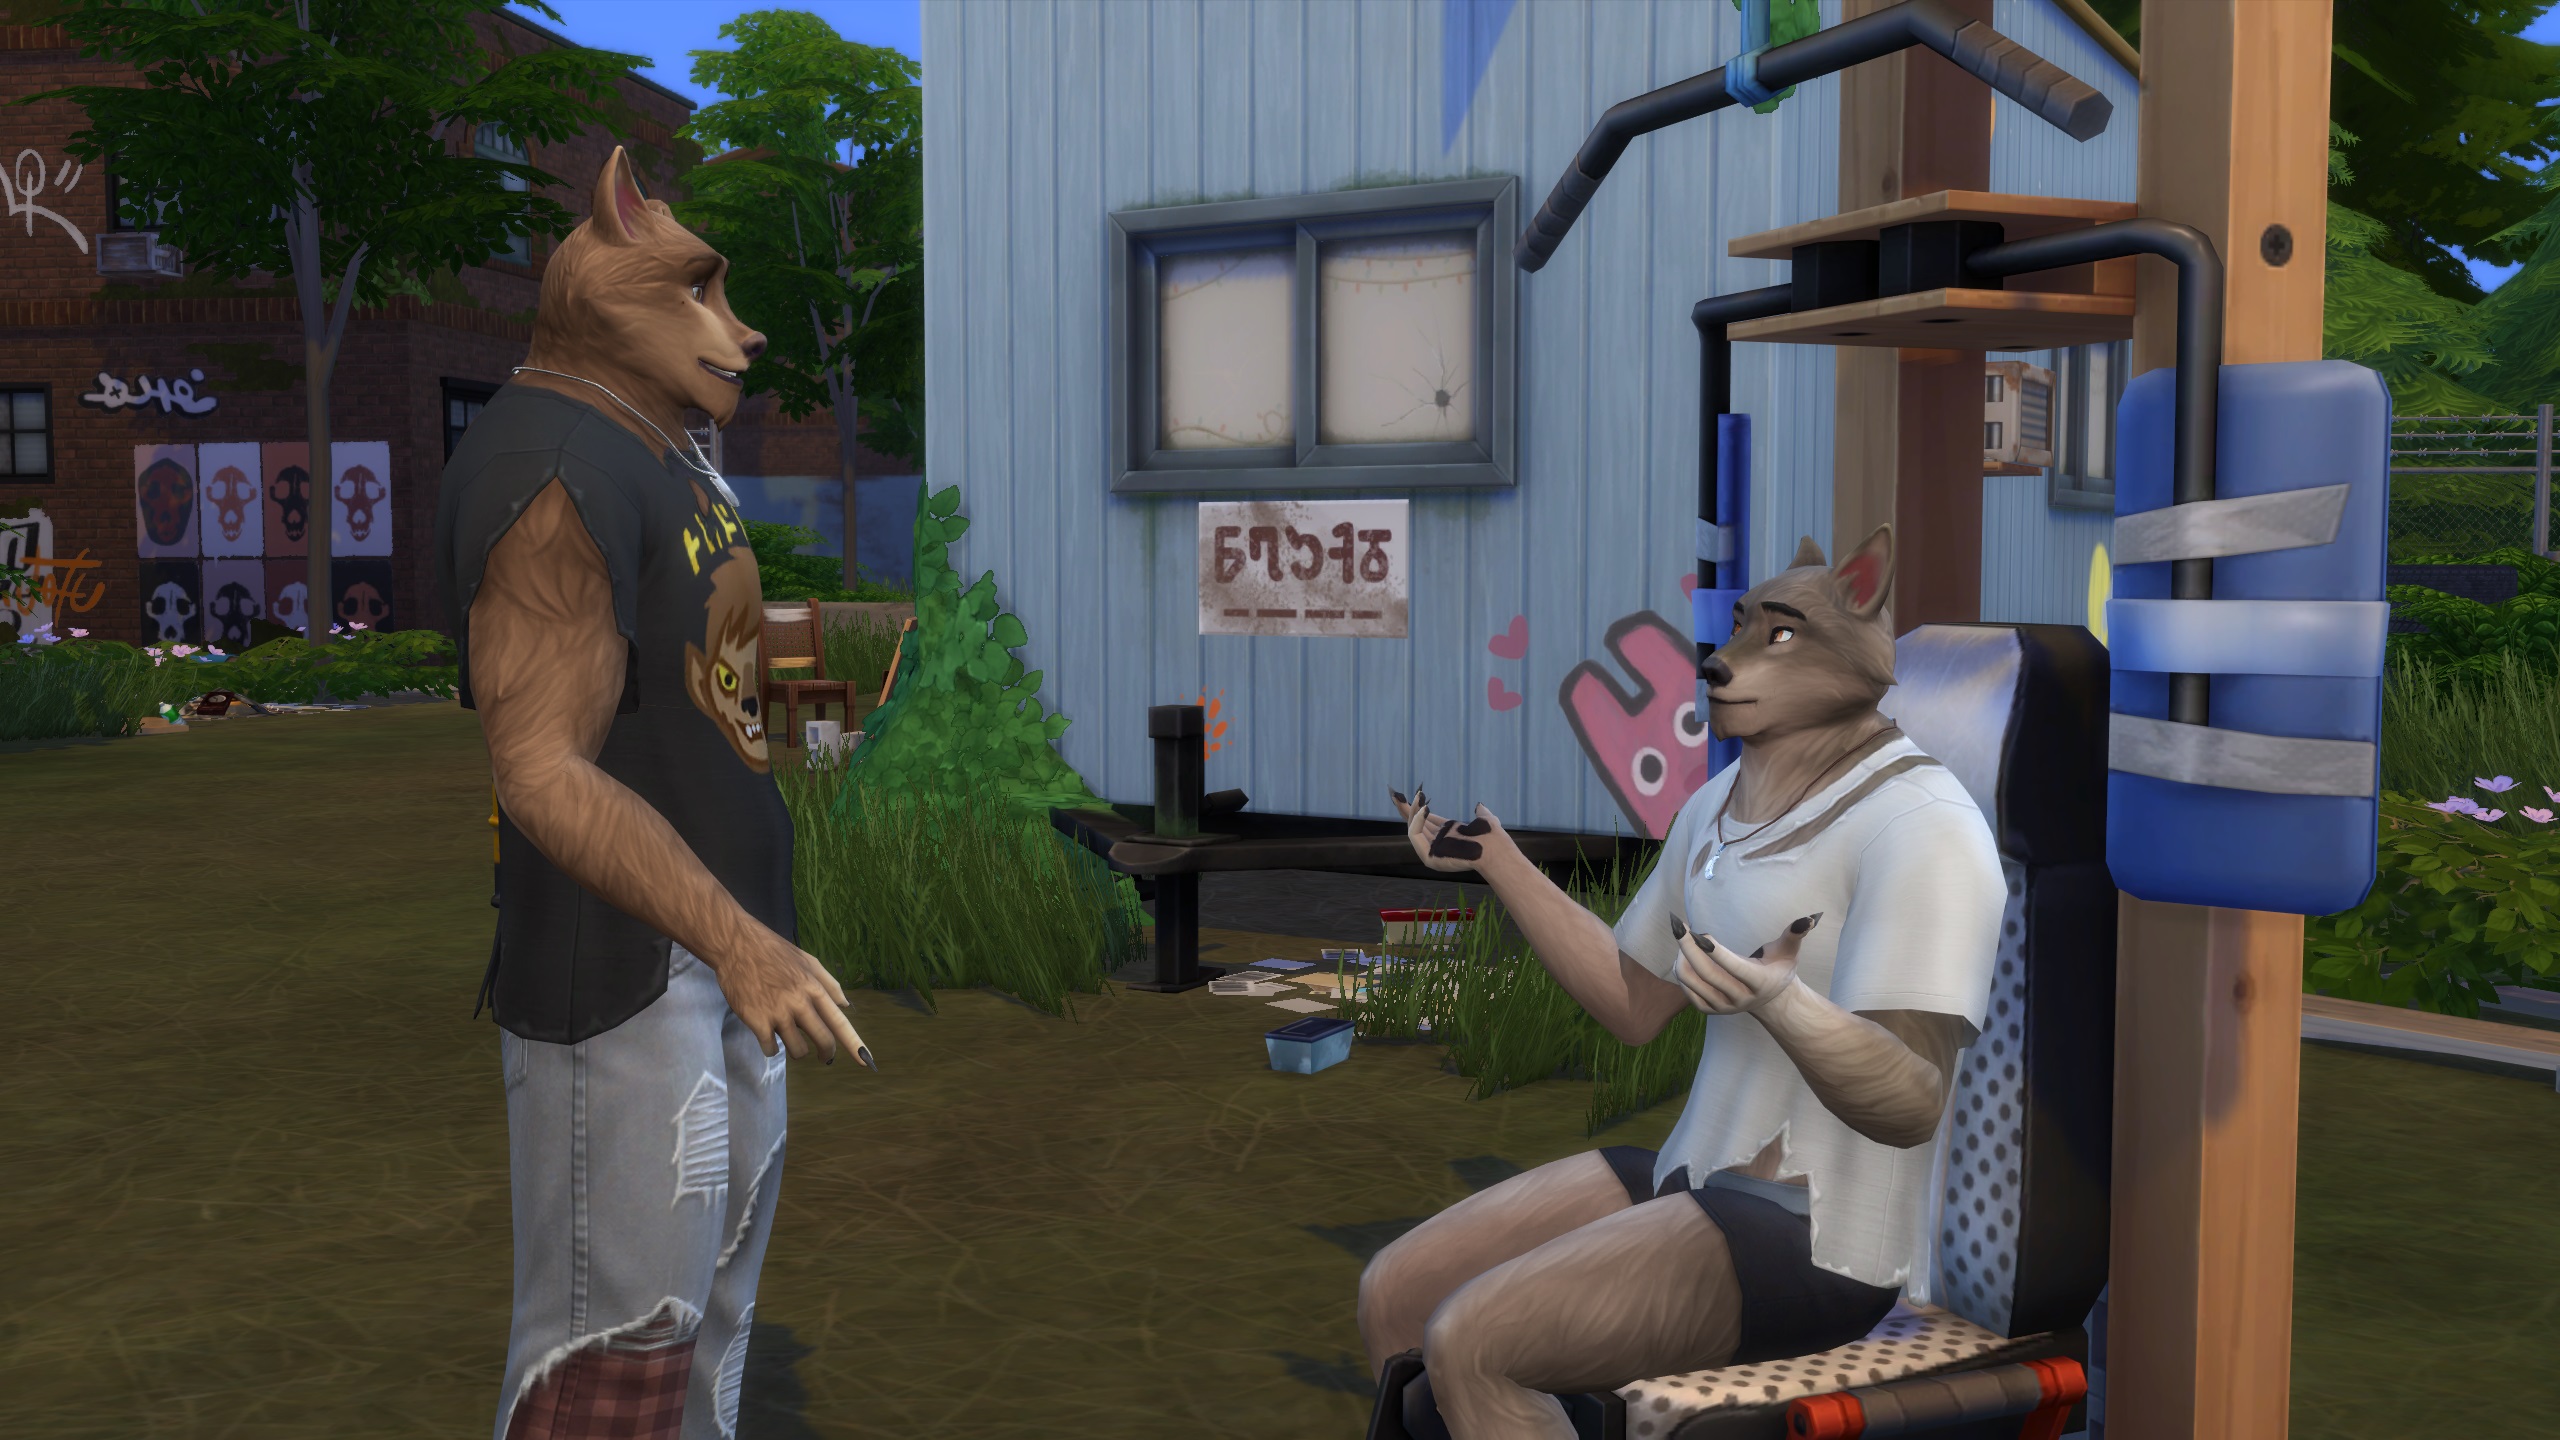 The Sims 4 Werewolves - Two werewolf Sims talk while one sits on a lifting bench outside the Wildfangs trailer.